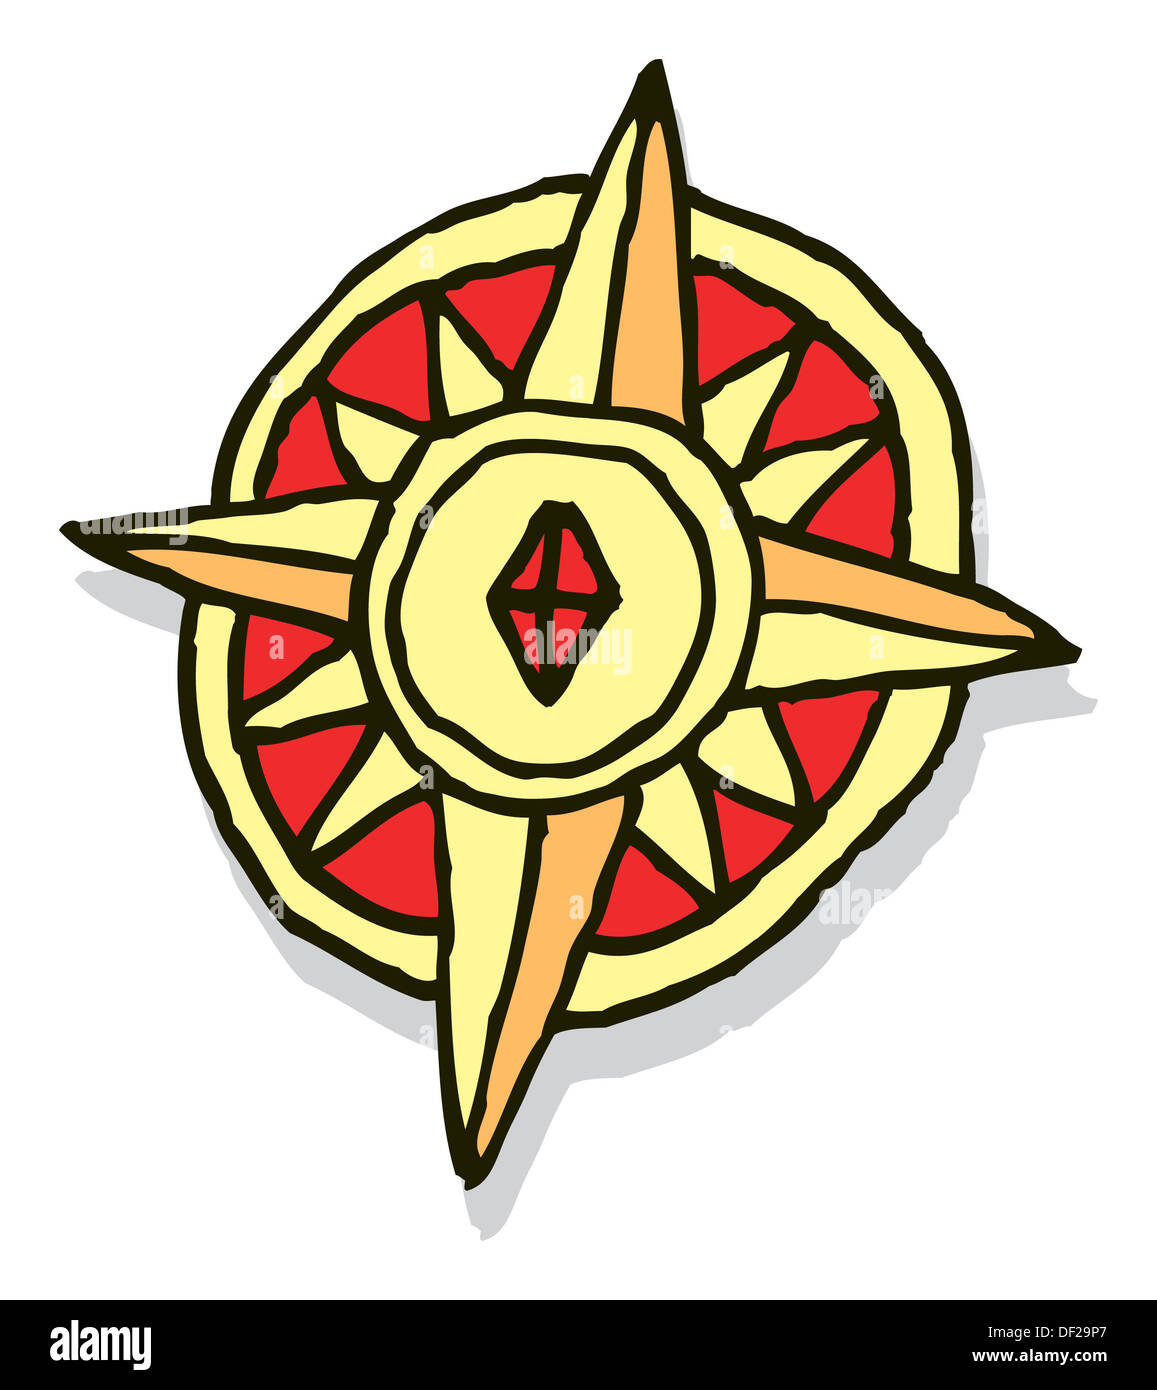 Rustic sketchy compass rose Stock Photo